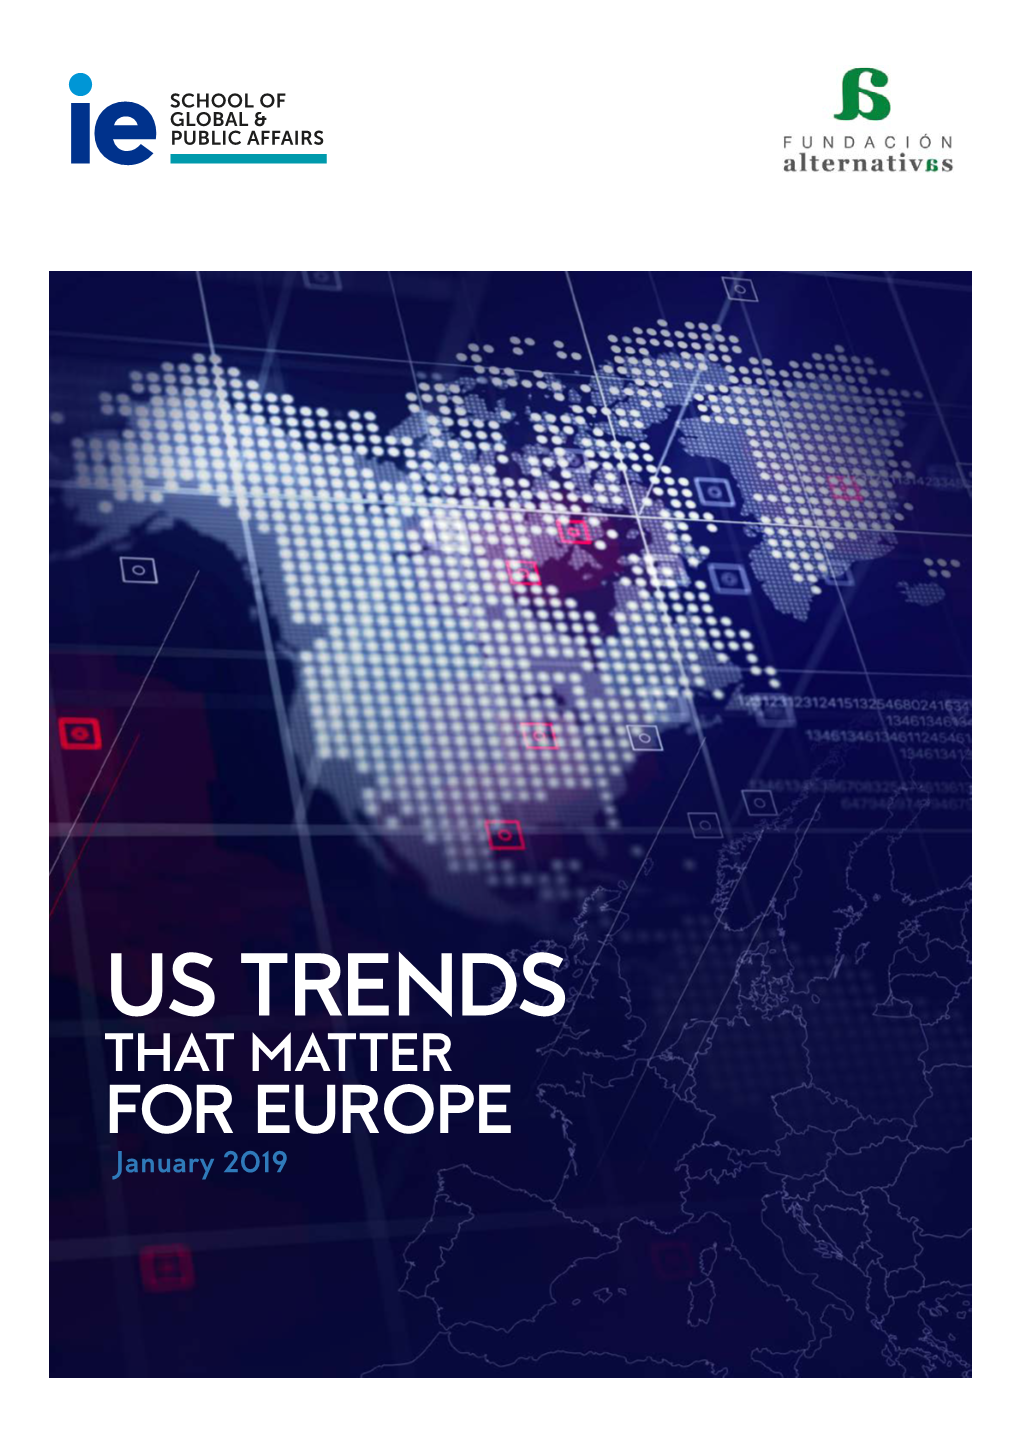 US TRENDS THAT MATTER for EUROPE January 2019 US Trends That Matter for Europe January 2019